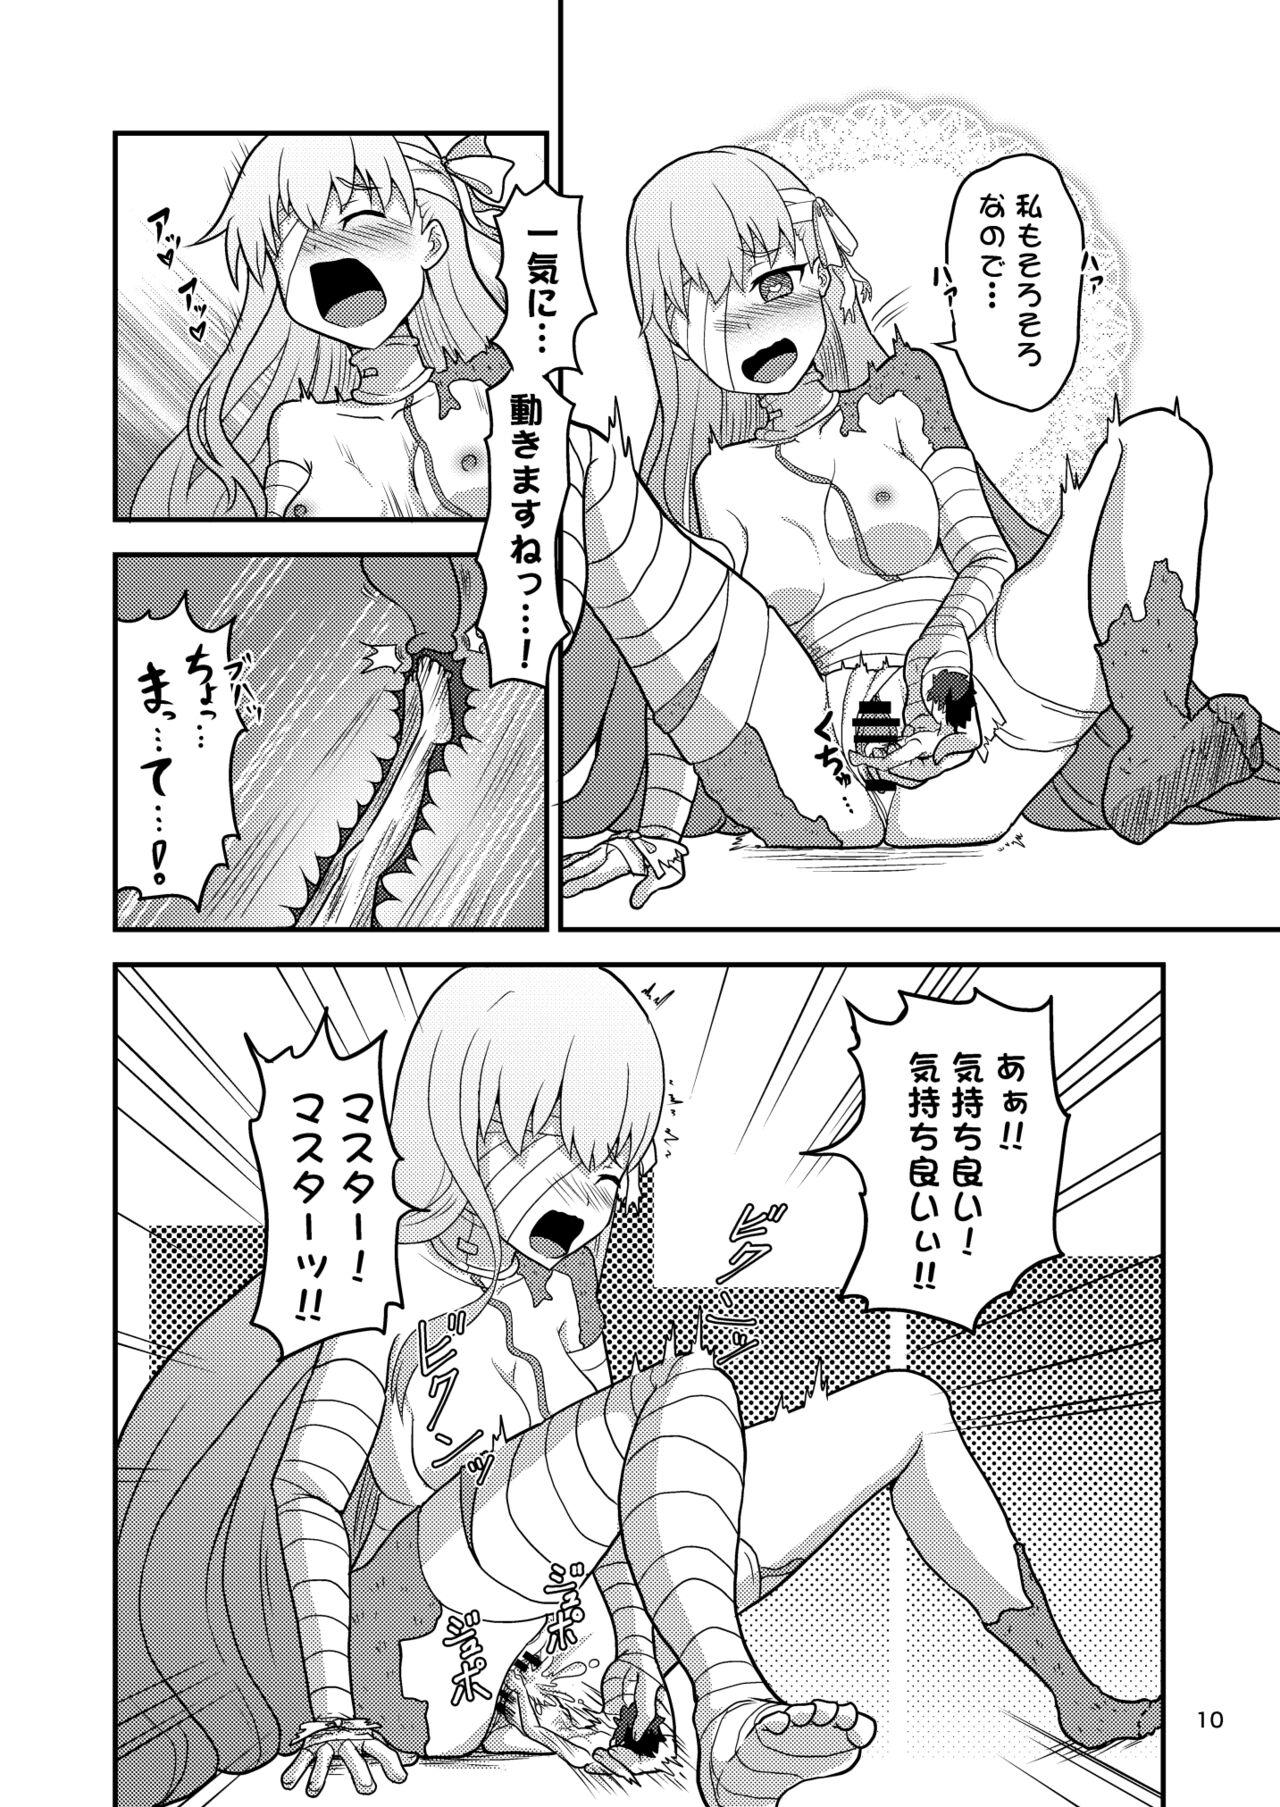 Ametuer Porn Hな私をゆるしてください - Fate grand order Toy - Page 11